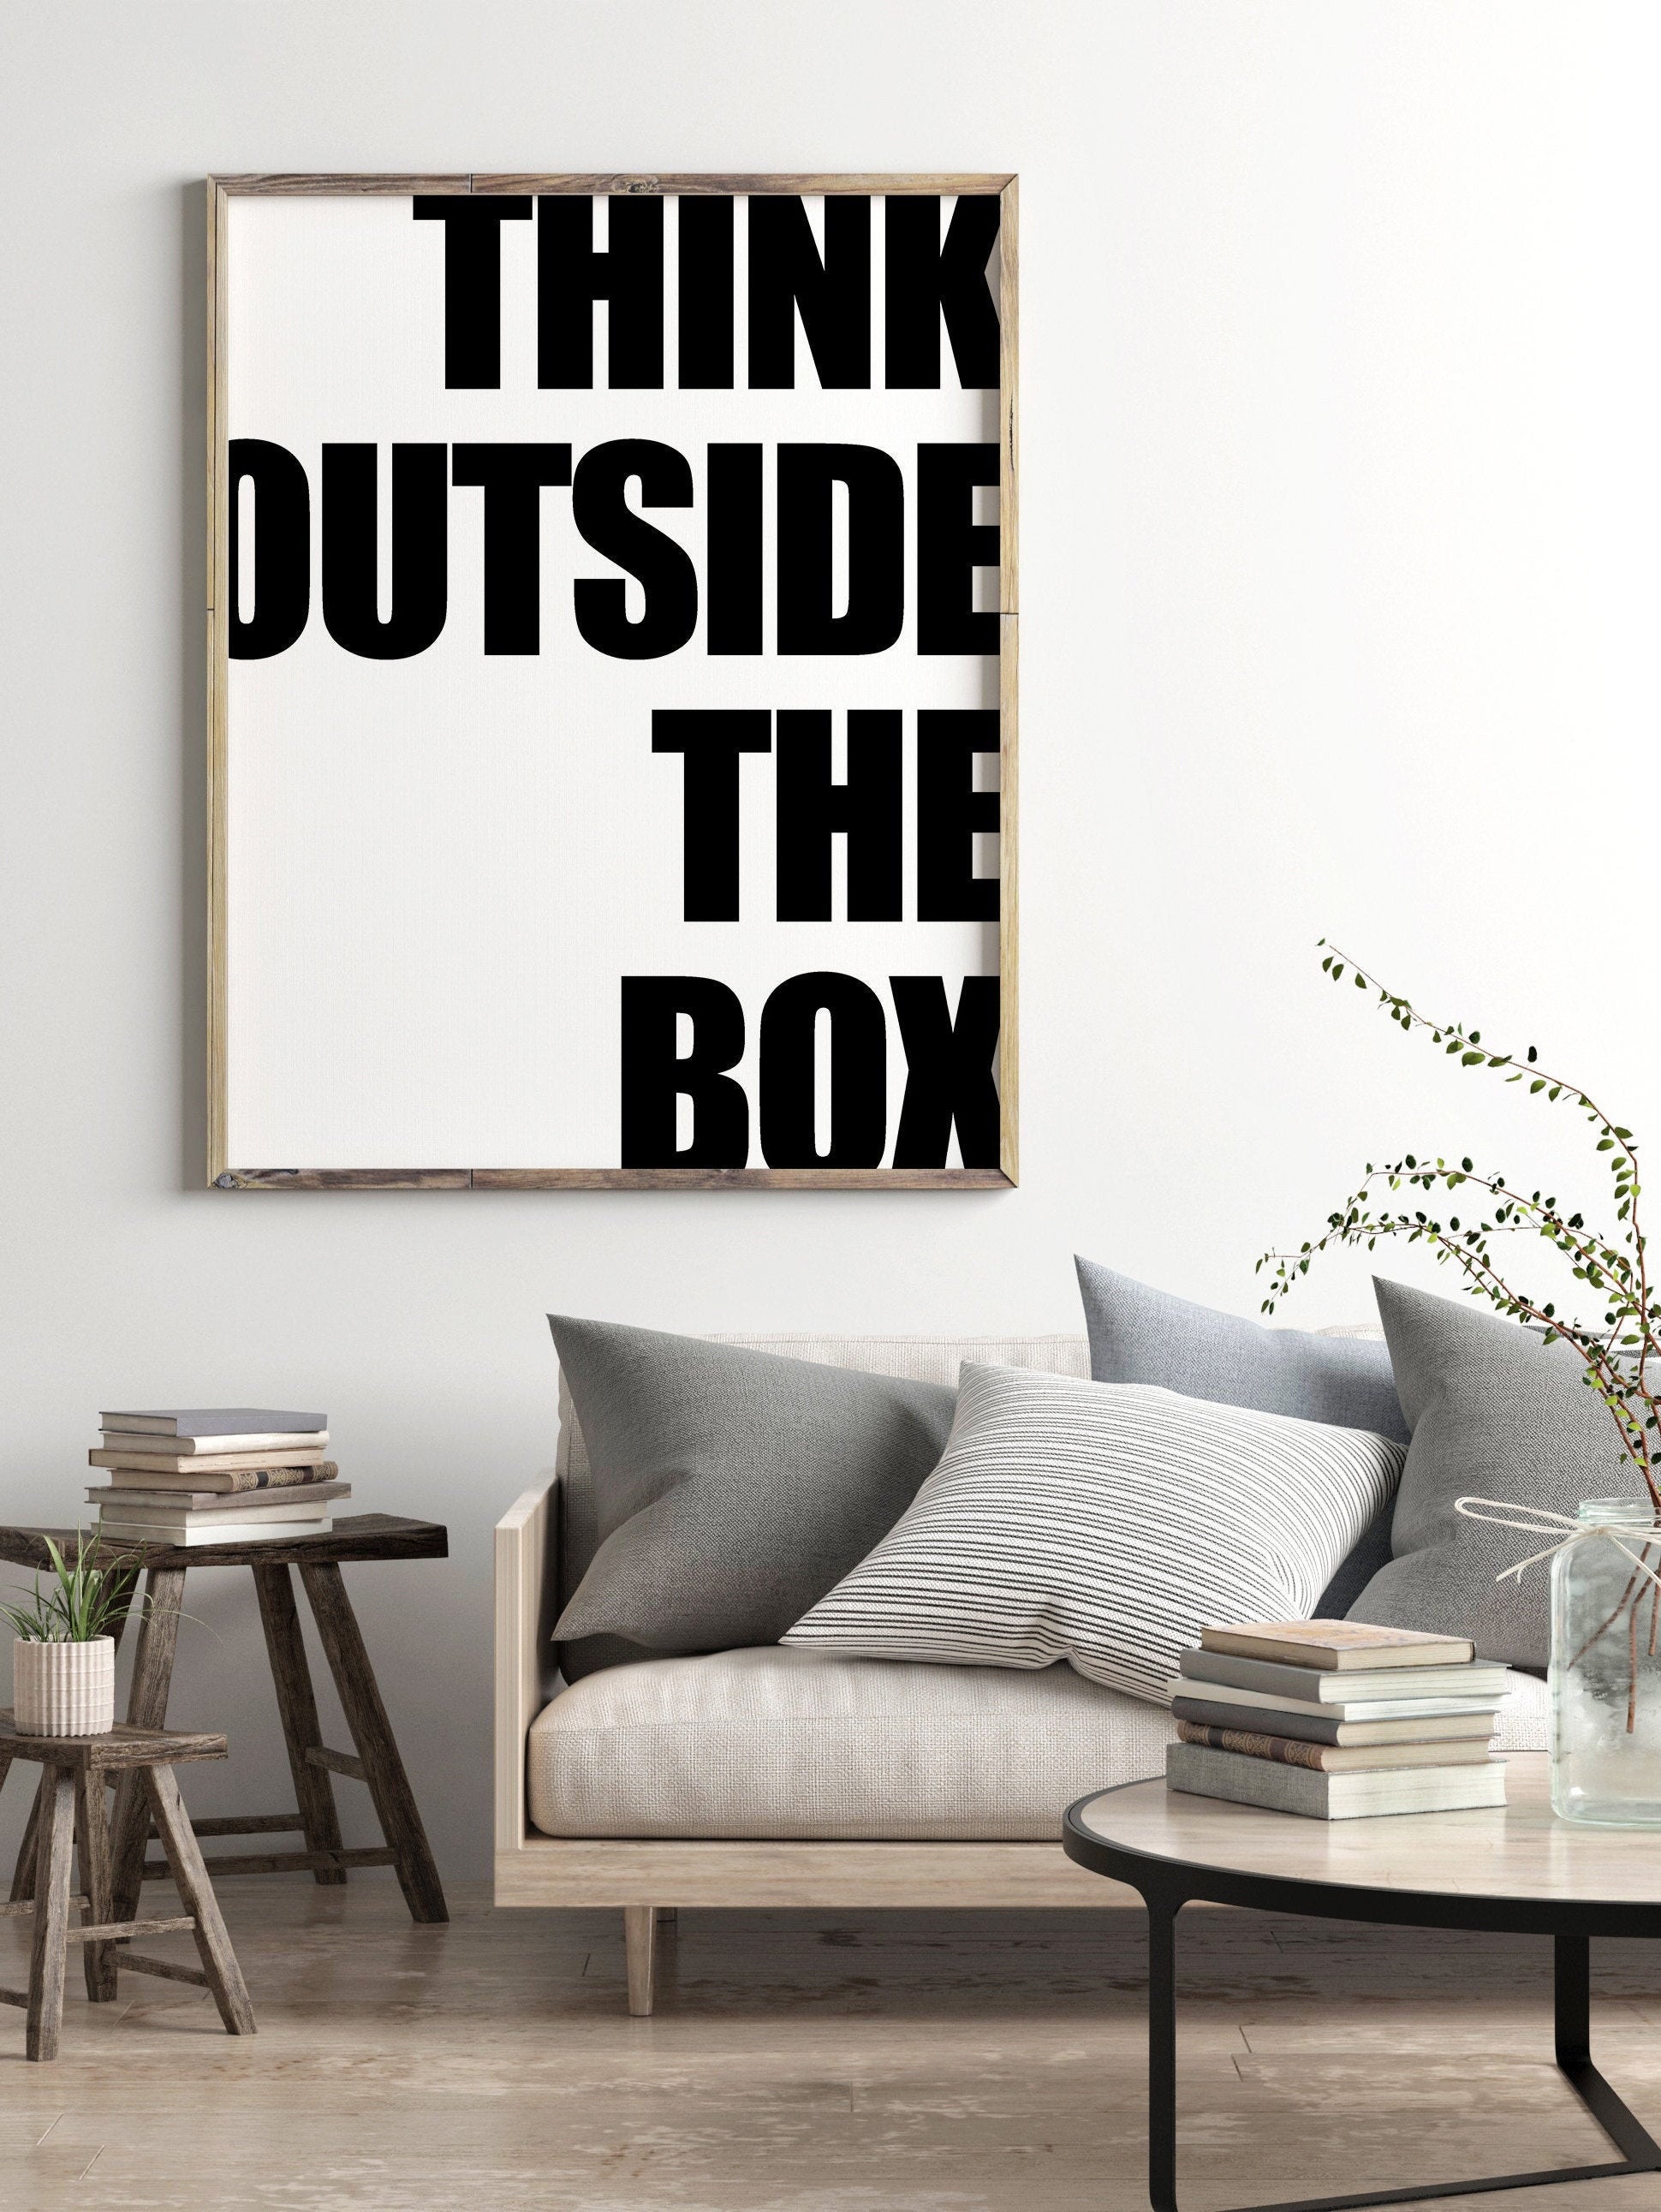 Wall decor motivational quote office wall art printable | Etsy